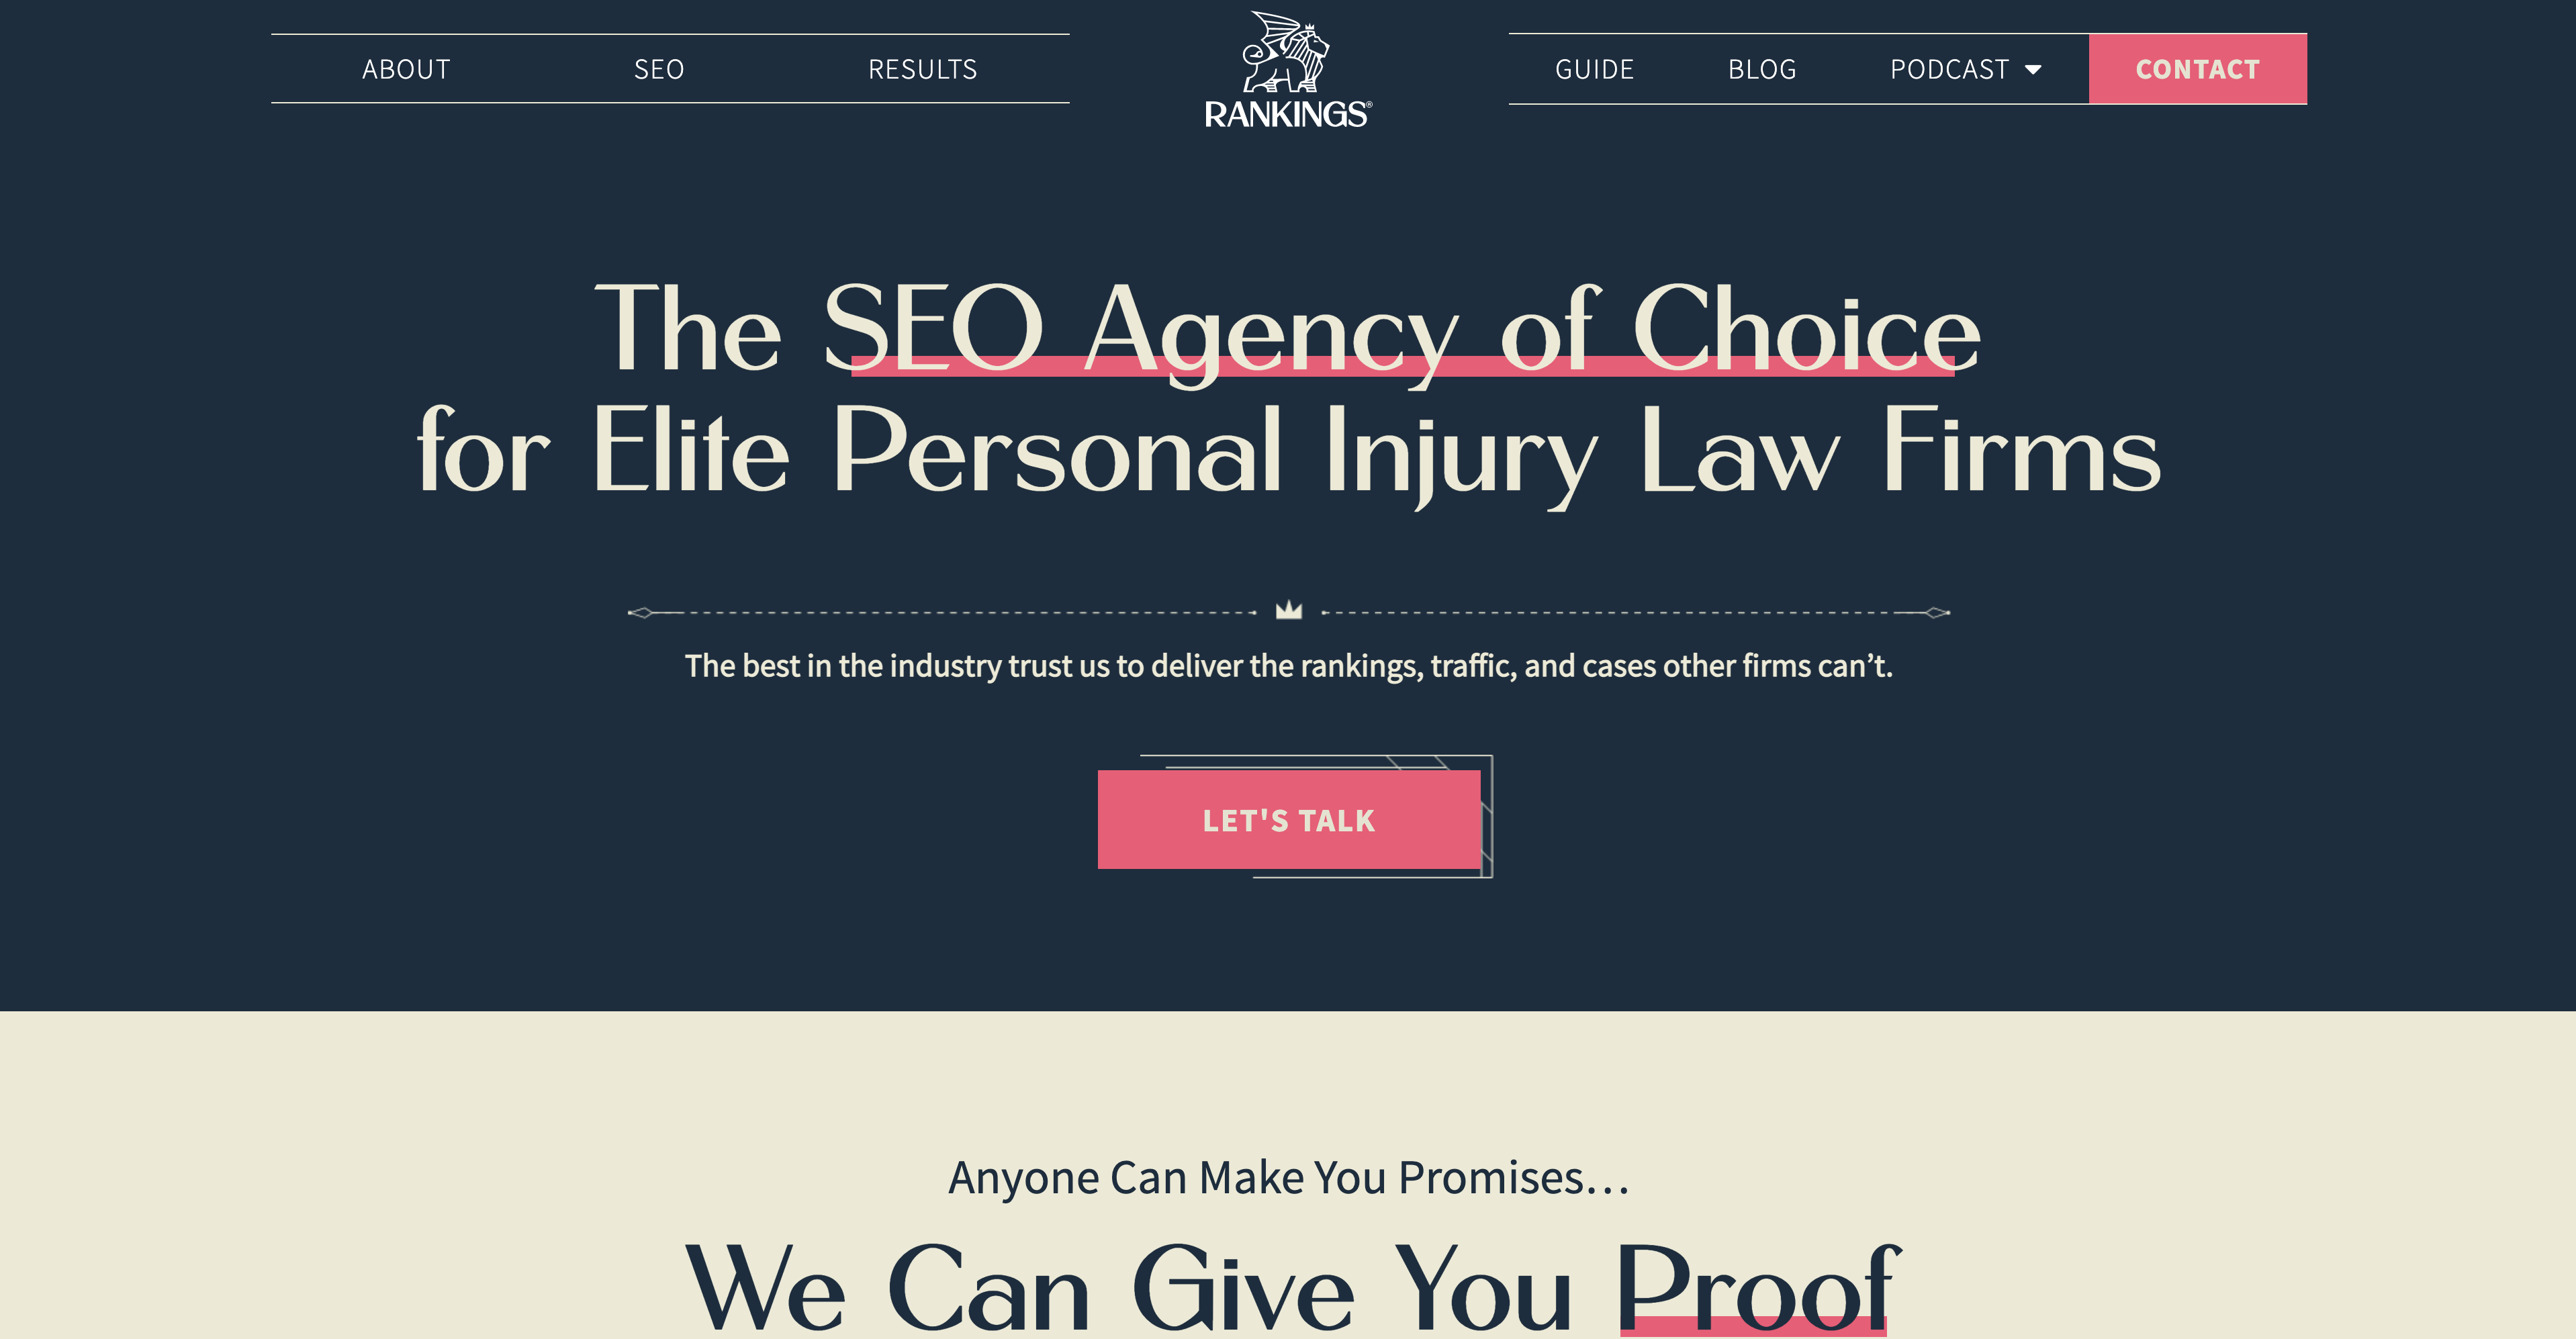 Rankings' home page for law firm SEO services.